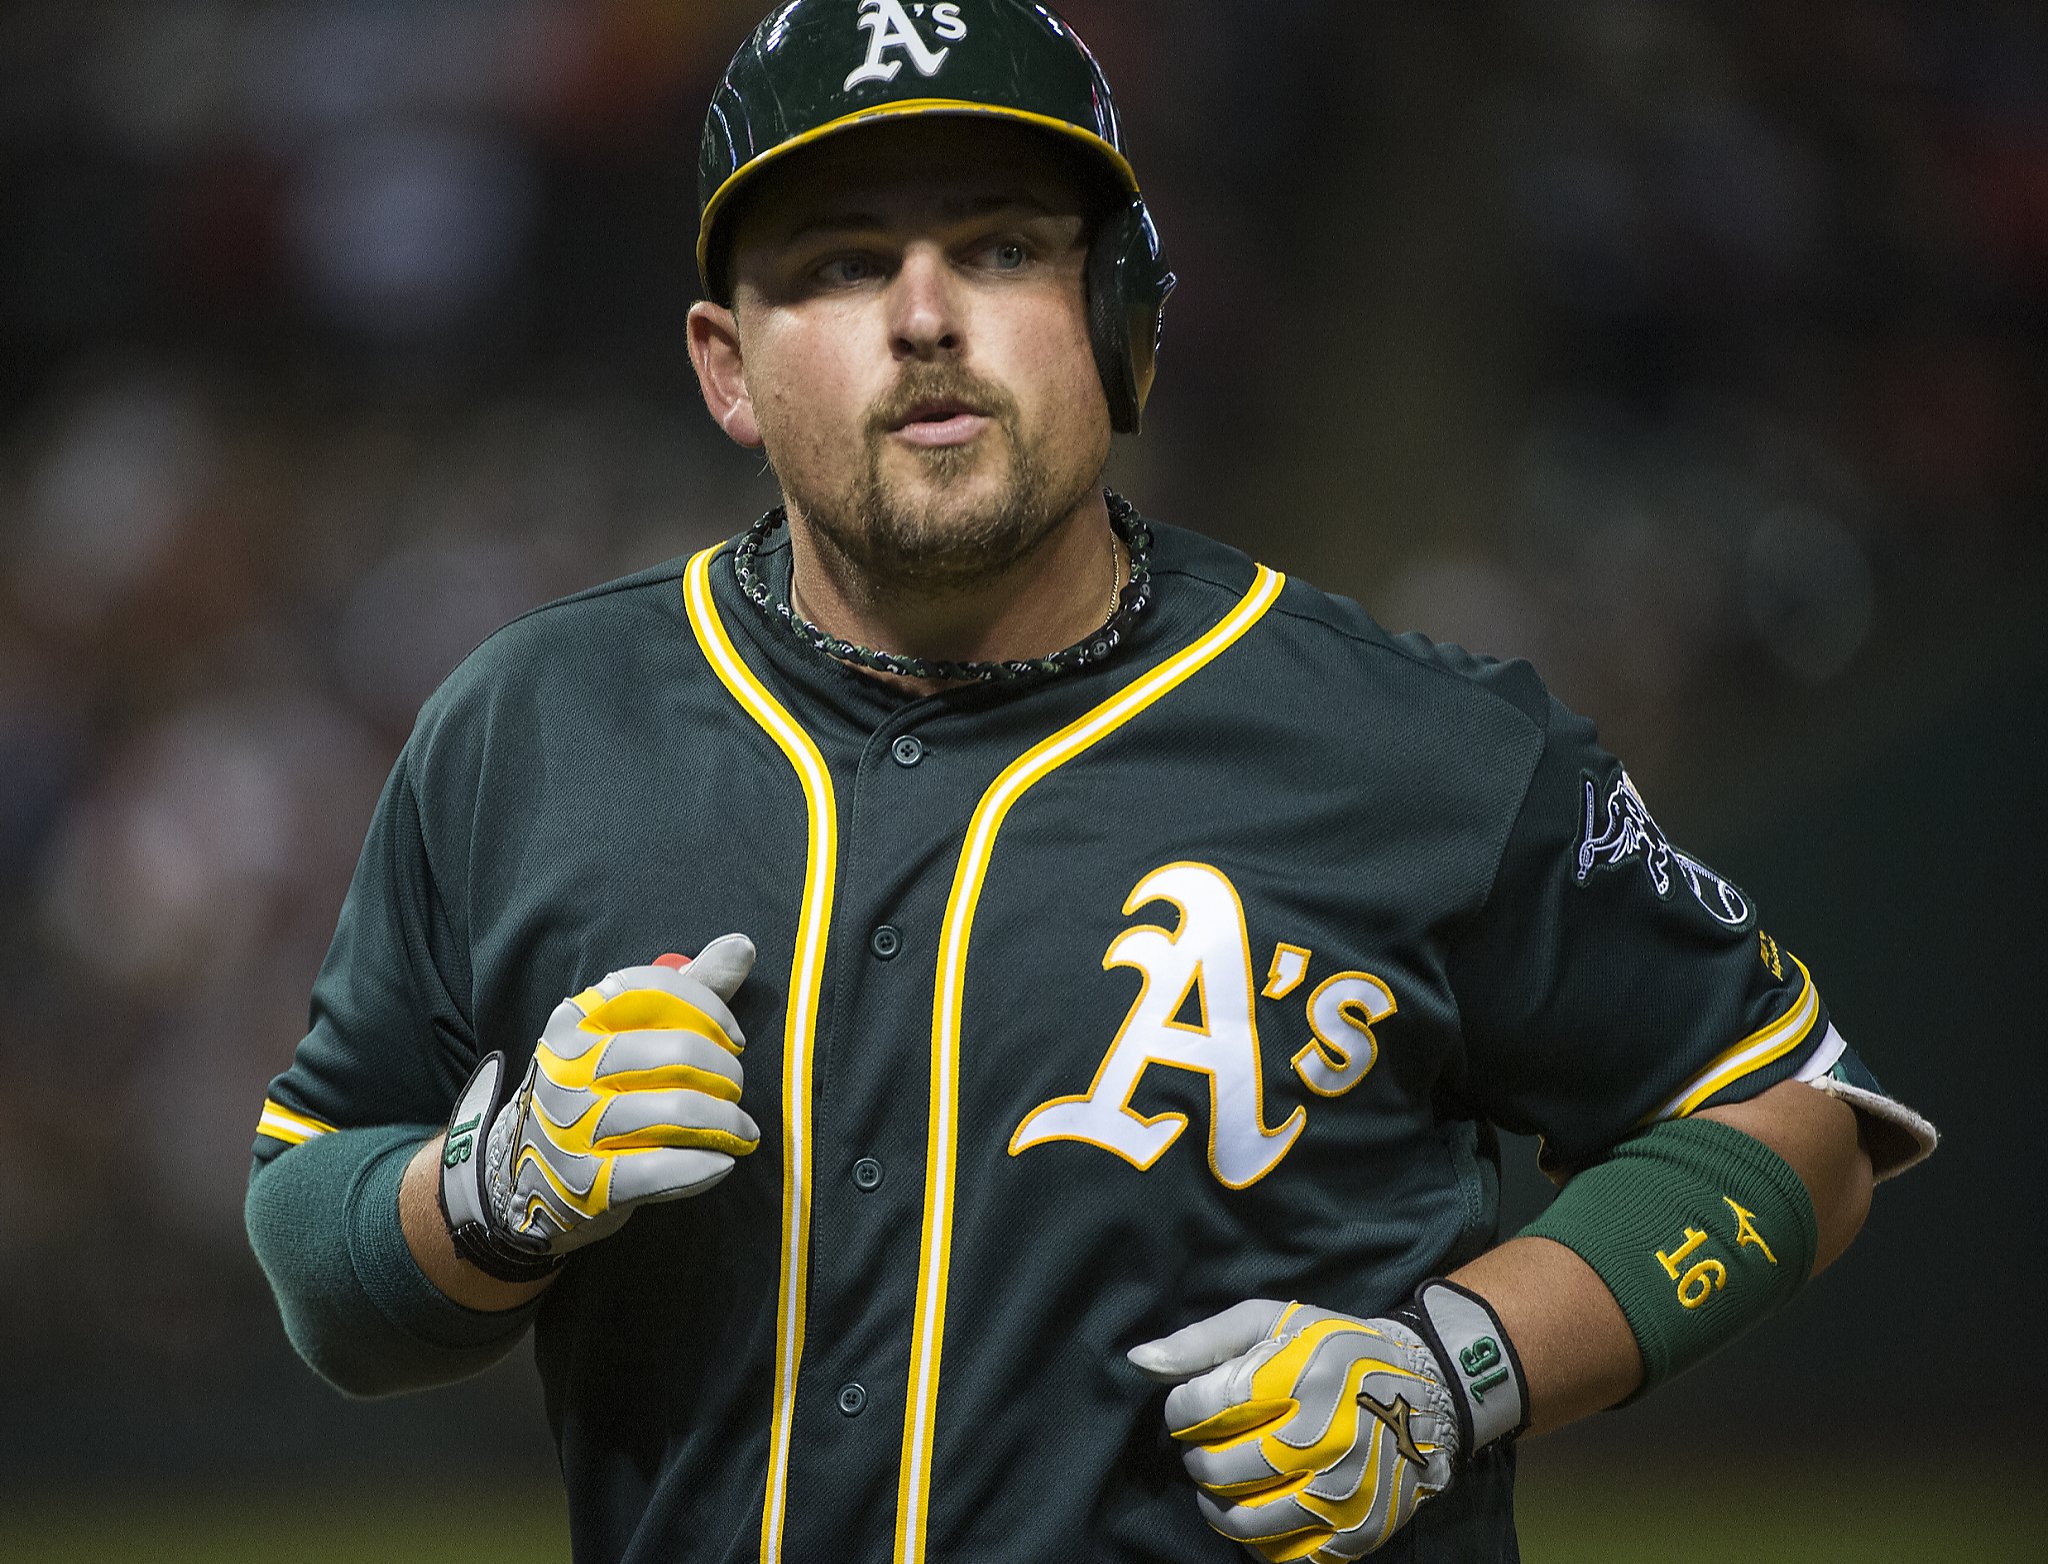 Billy Butler, one of few A's who hits Chris Sale OK, out sick